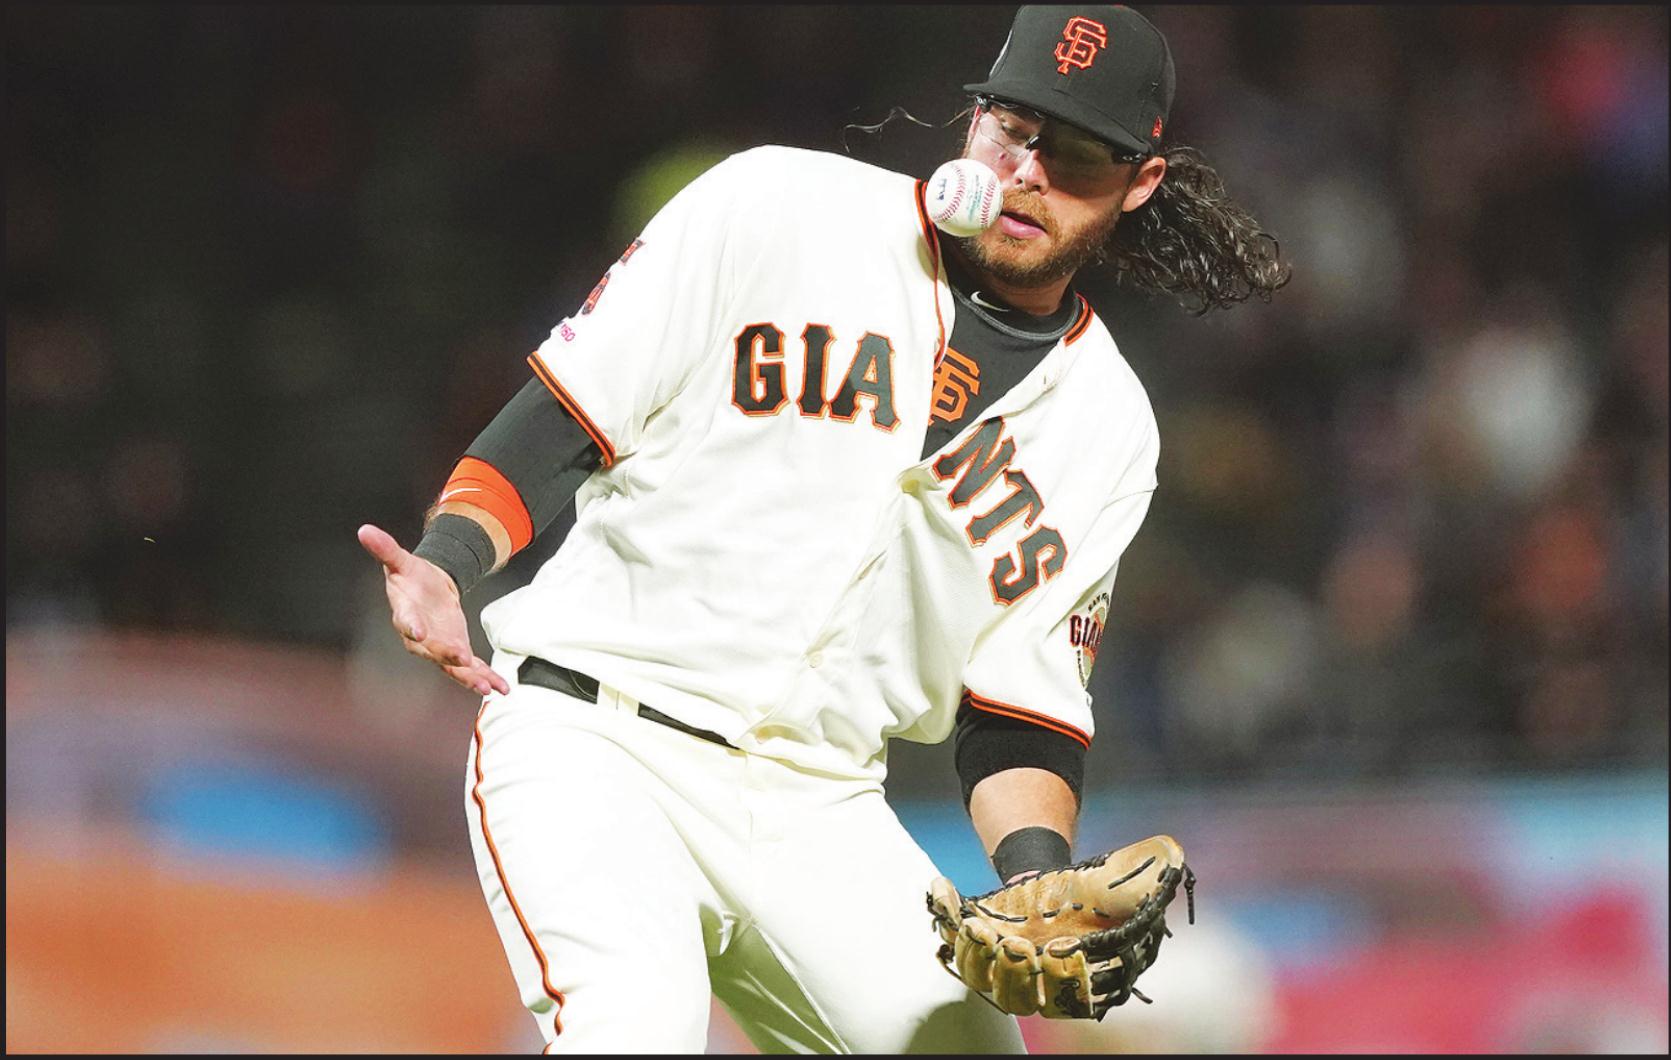 Who is the face of SF Giants?